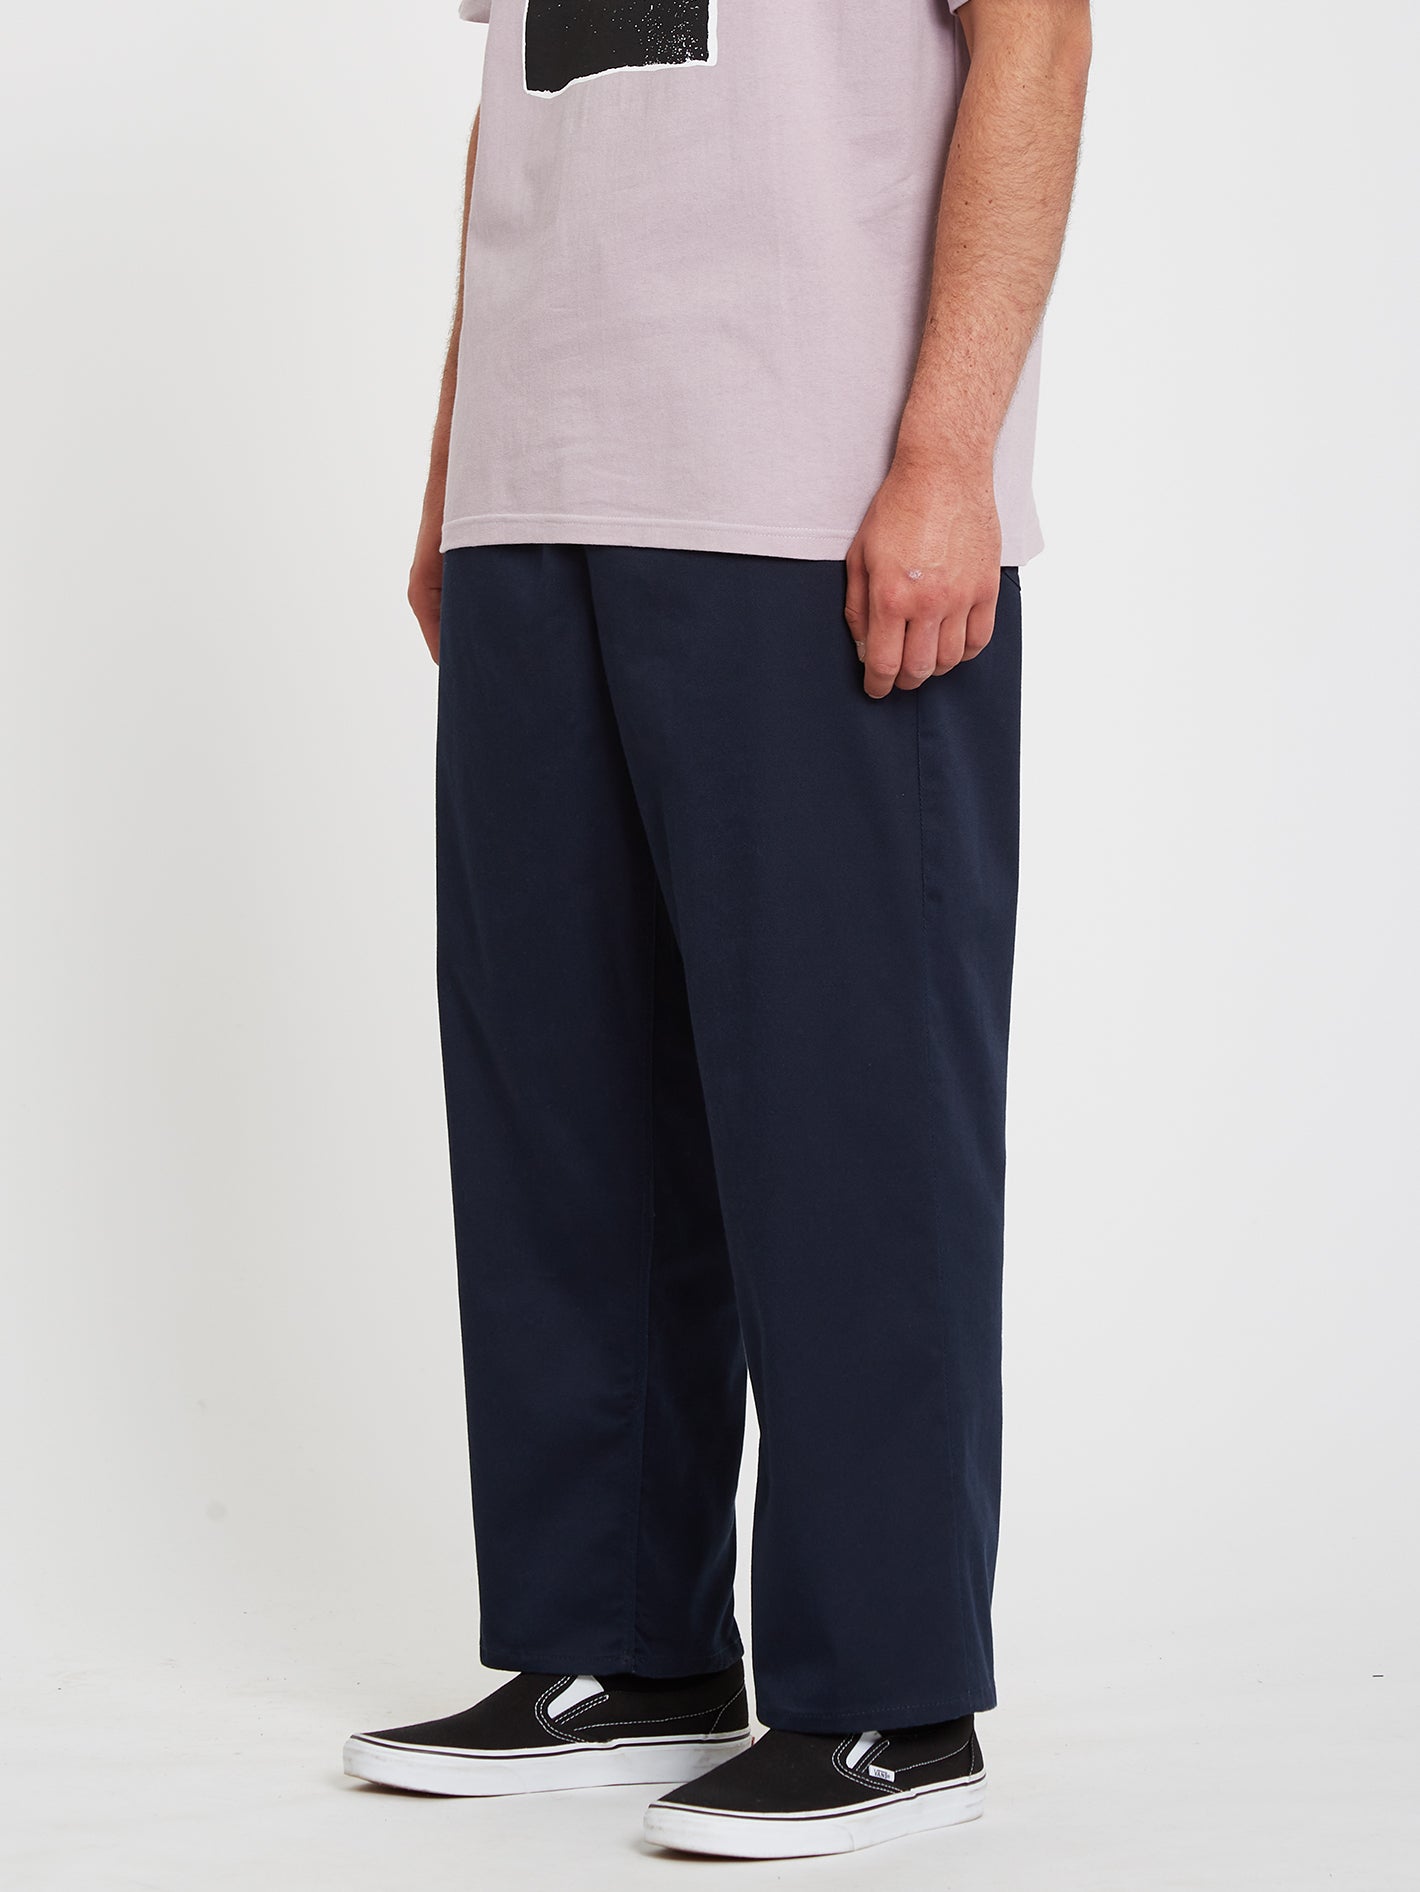 Outer Spaced Solid Elastic Waist Pants - Navy